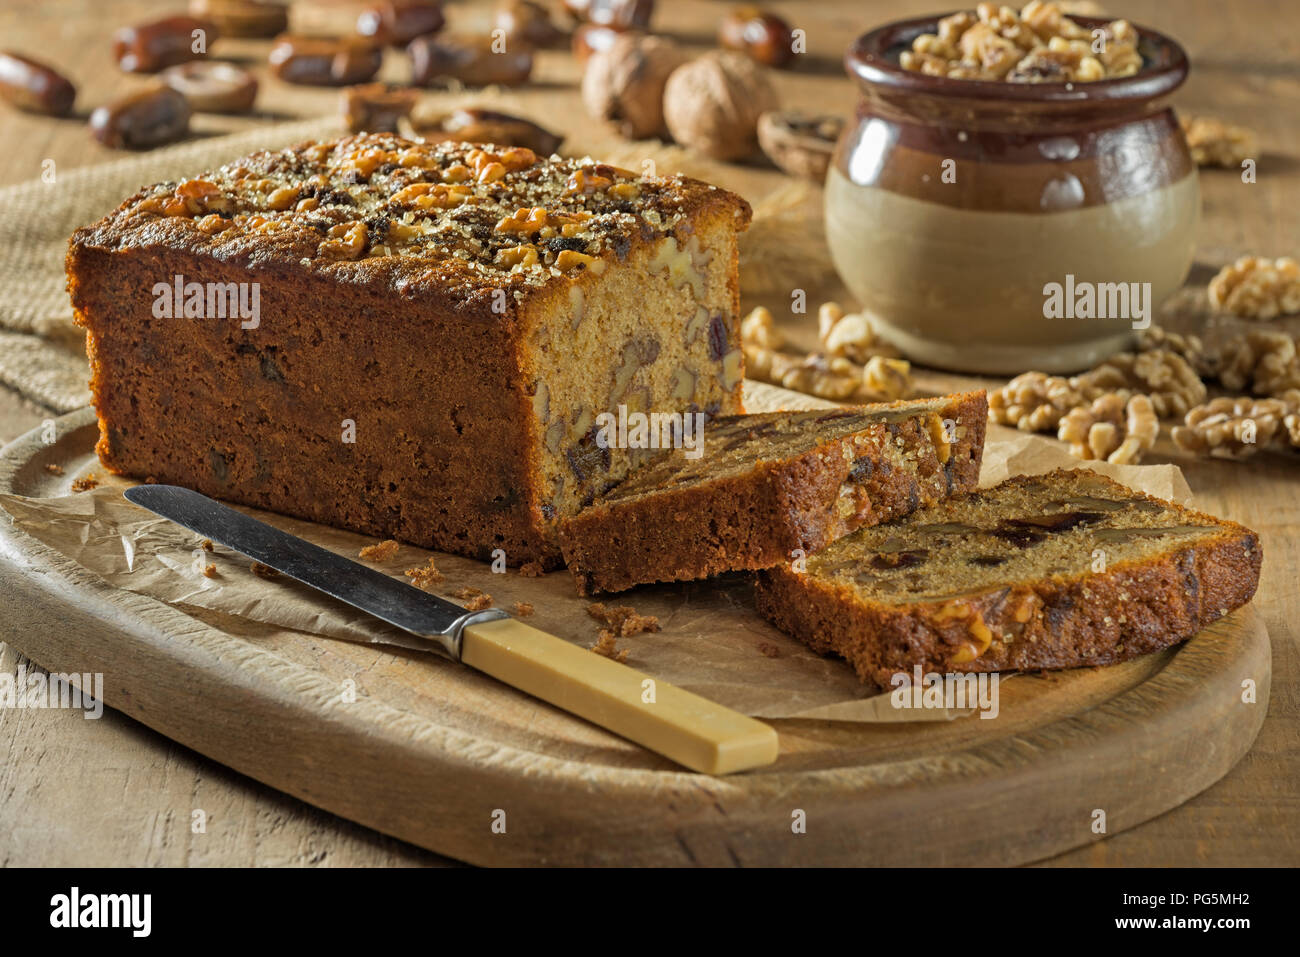 Date and walnut loaf. Stock Photo